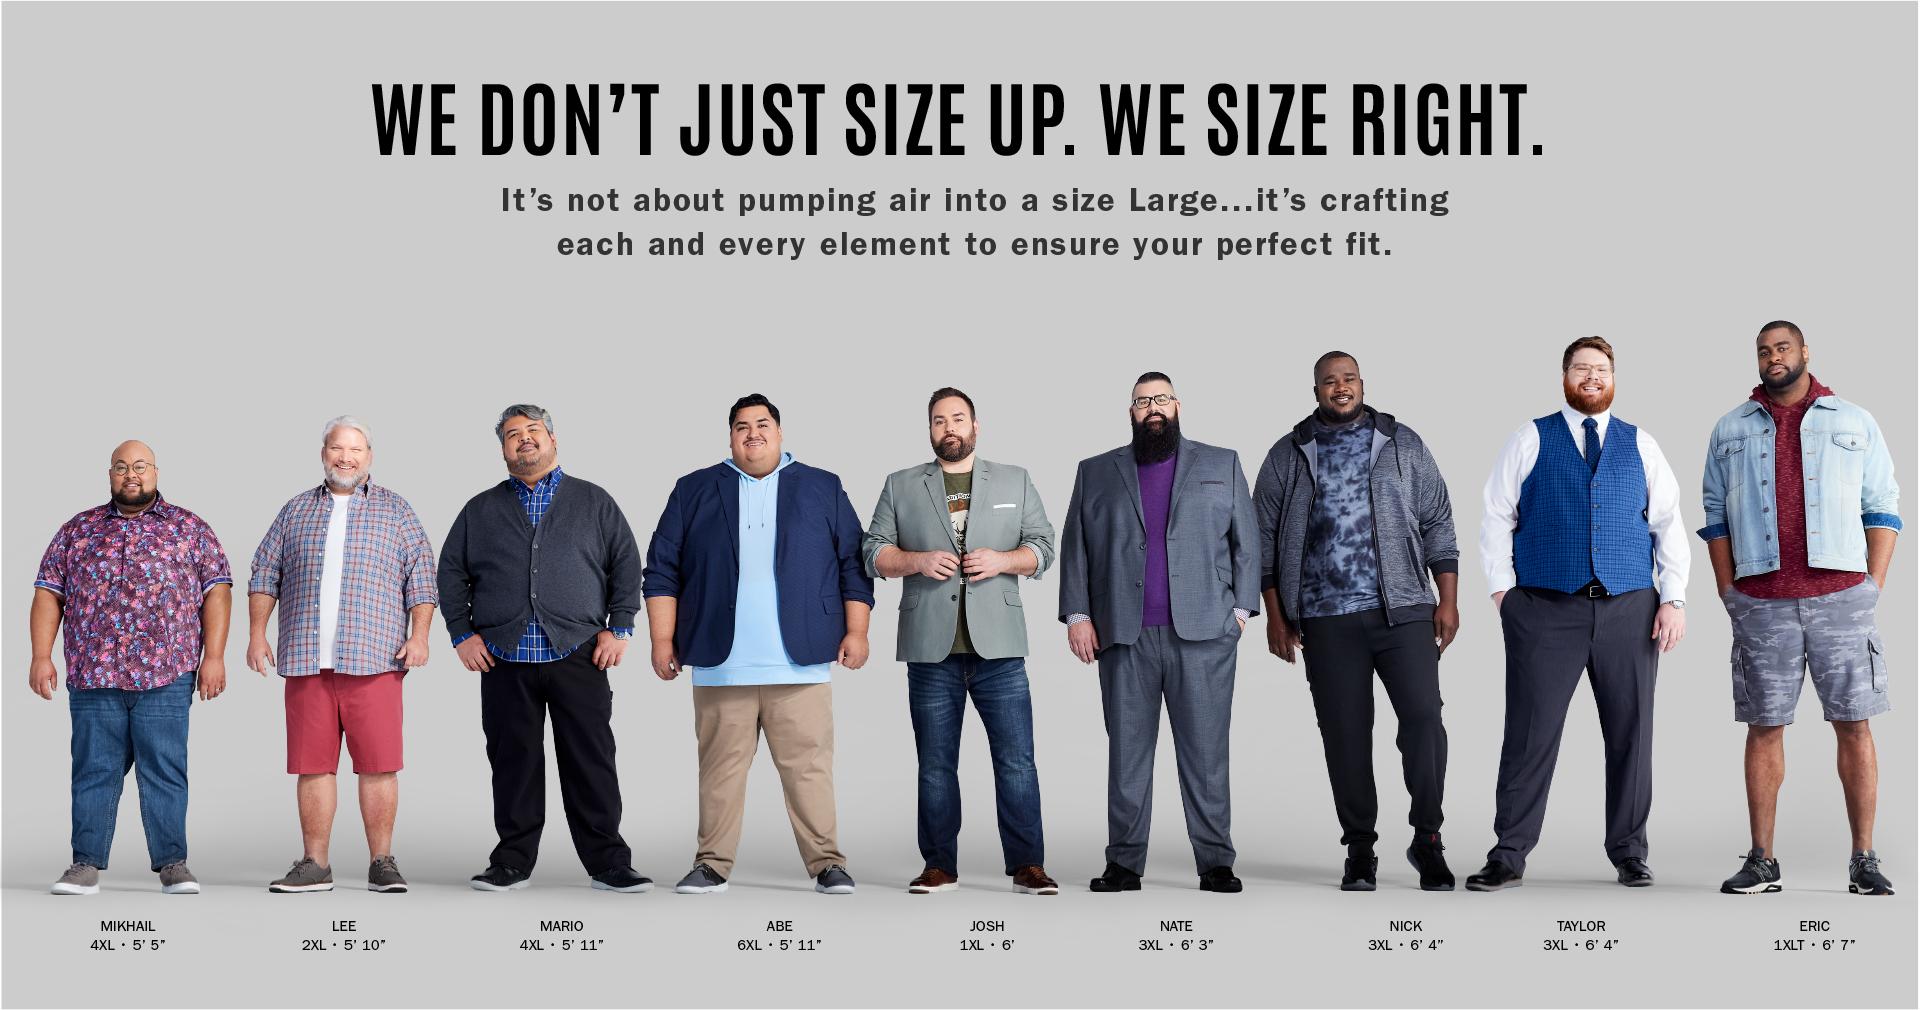 WE DON’T JUST SIZE UP. WE SIZE RIGHT. | It’s not about pumping air into a size Large...it’s crafting each and every element to ensure your perfect fit.